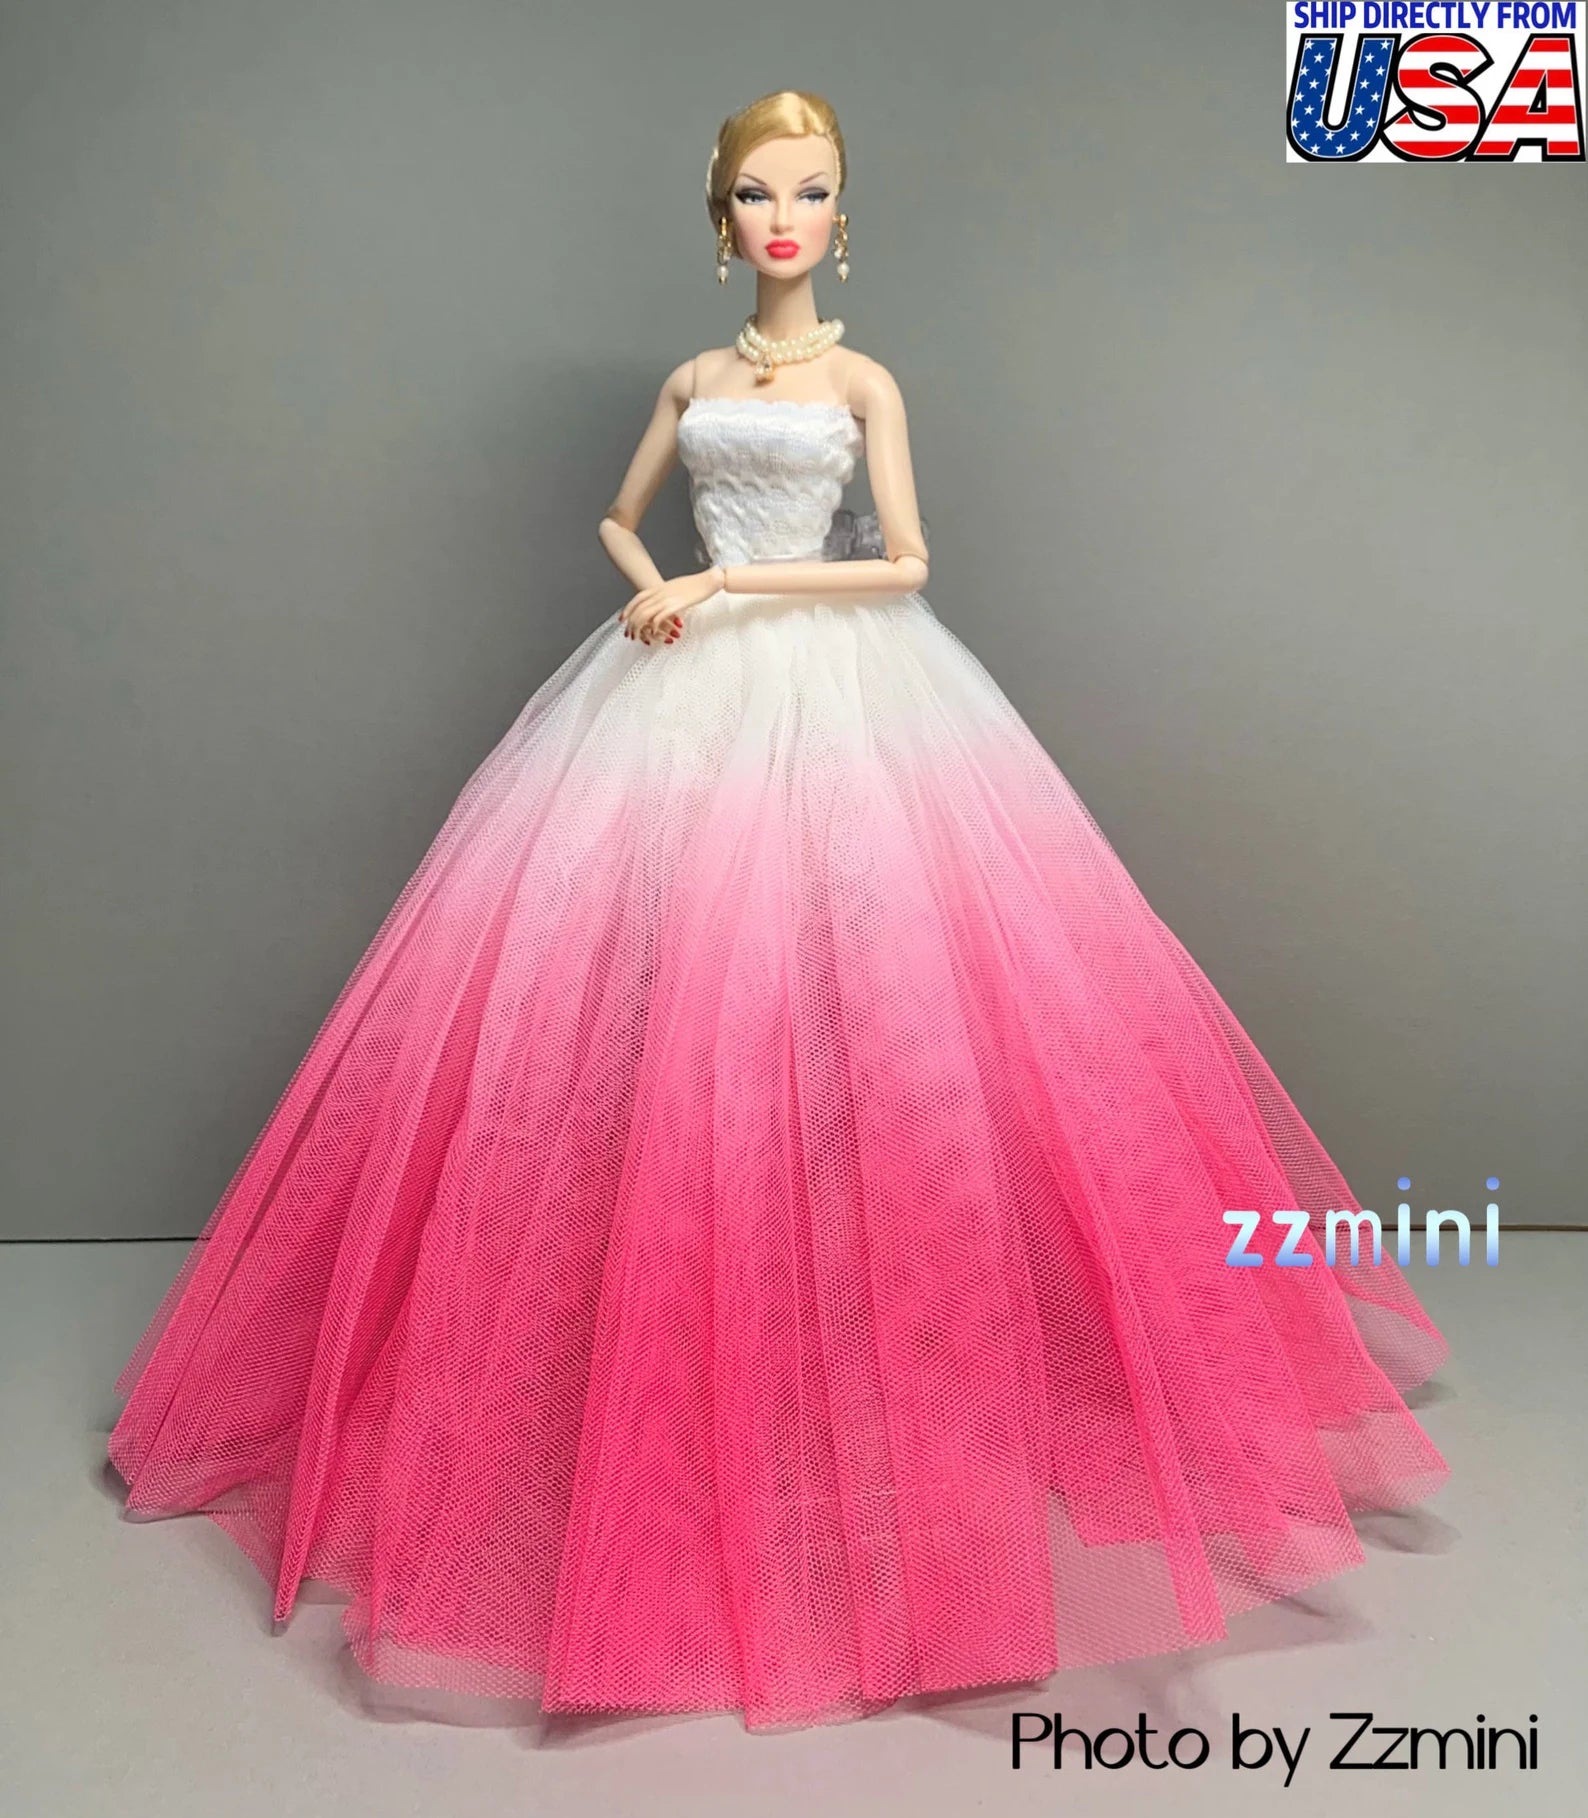 High Quality Handmade Clothes For 11.5'' / 30cm Fashion Doll Dress Gradient Color Pink & White Gown Wedding Dress